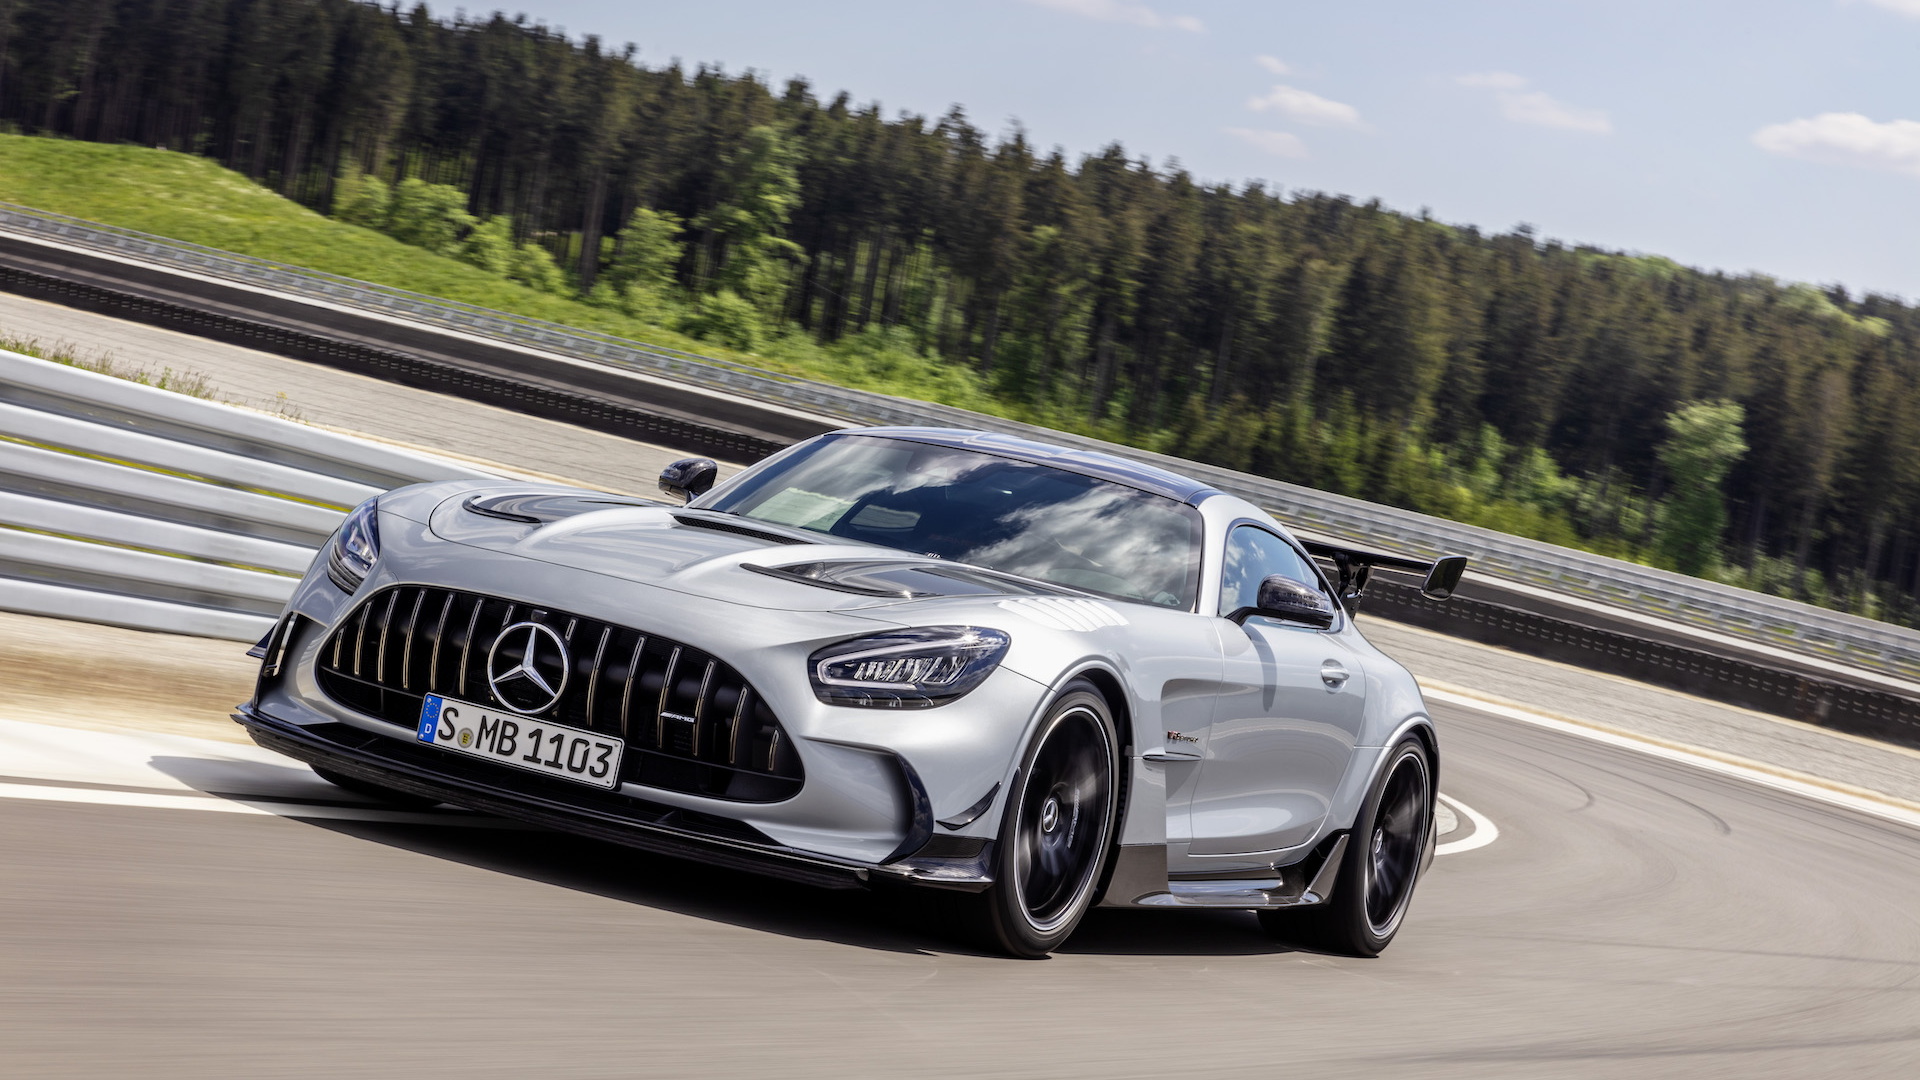 2021 Mercedes Amg Gt Black Series Revealed With 720 Hp And